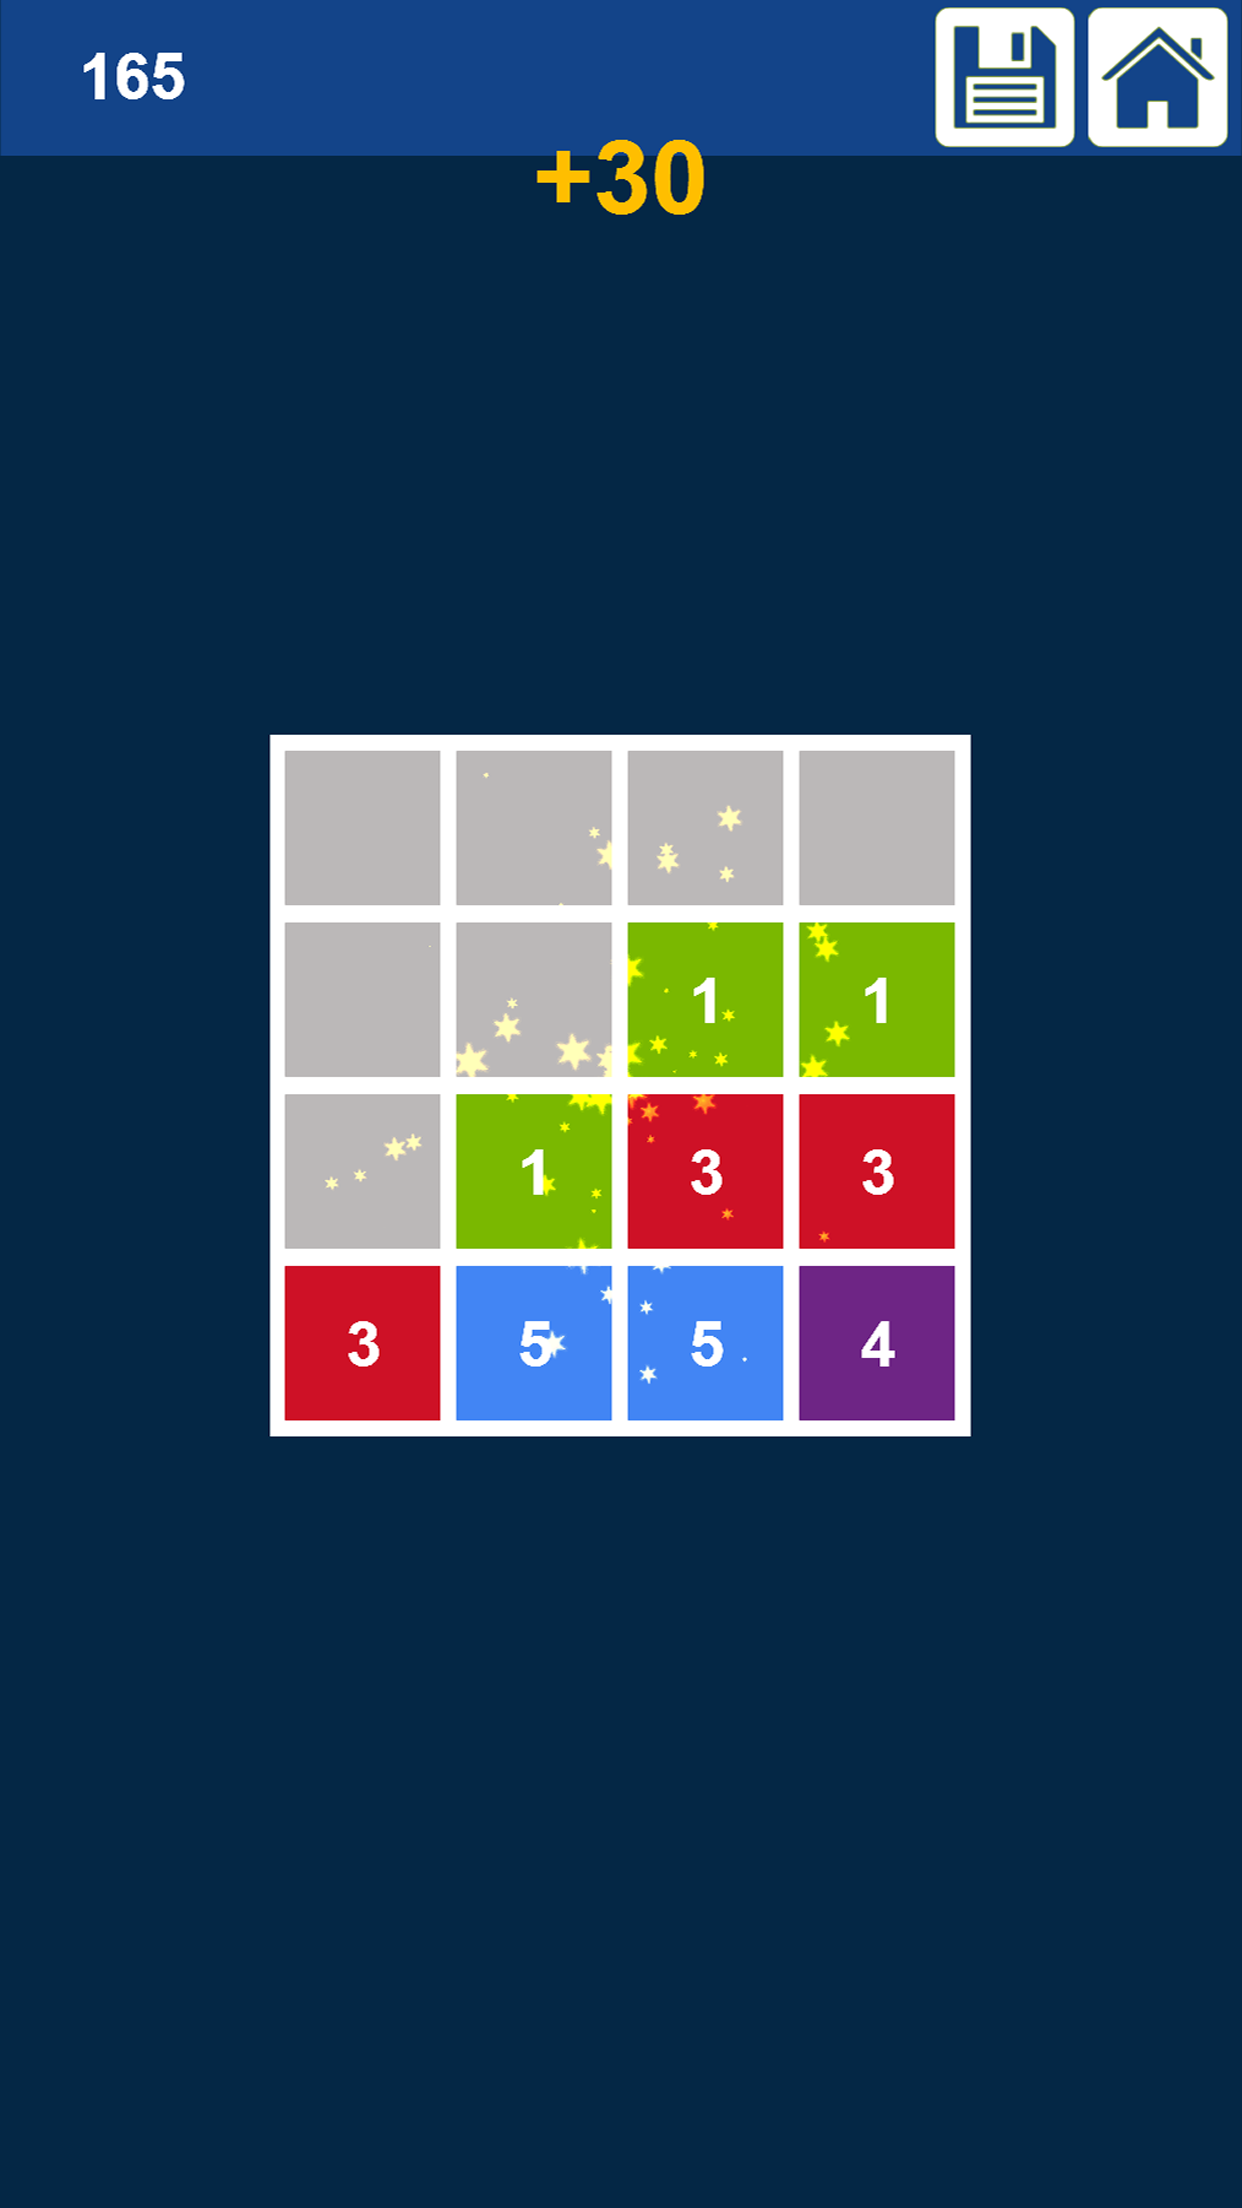 Tired of 2048? Try 33